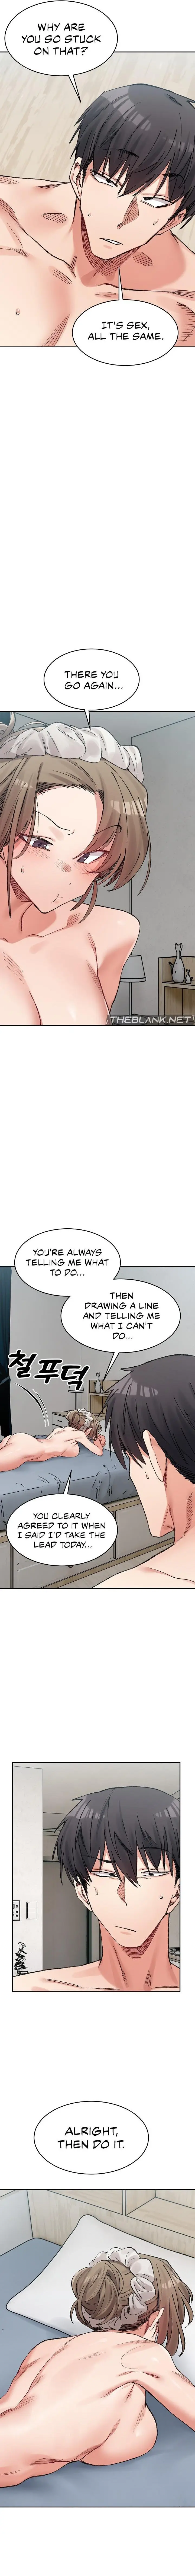 a-delicate-relationship-chap-30-2